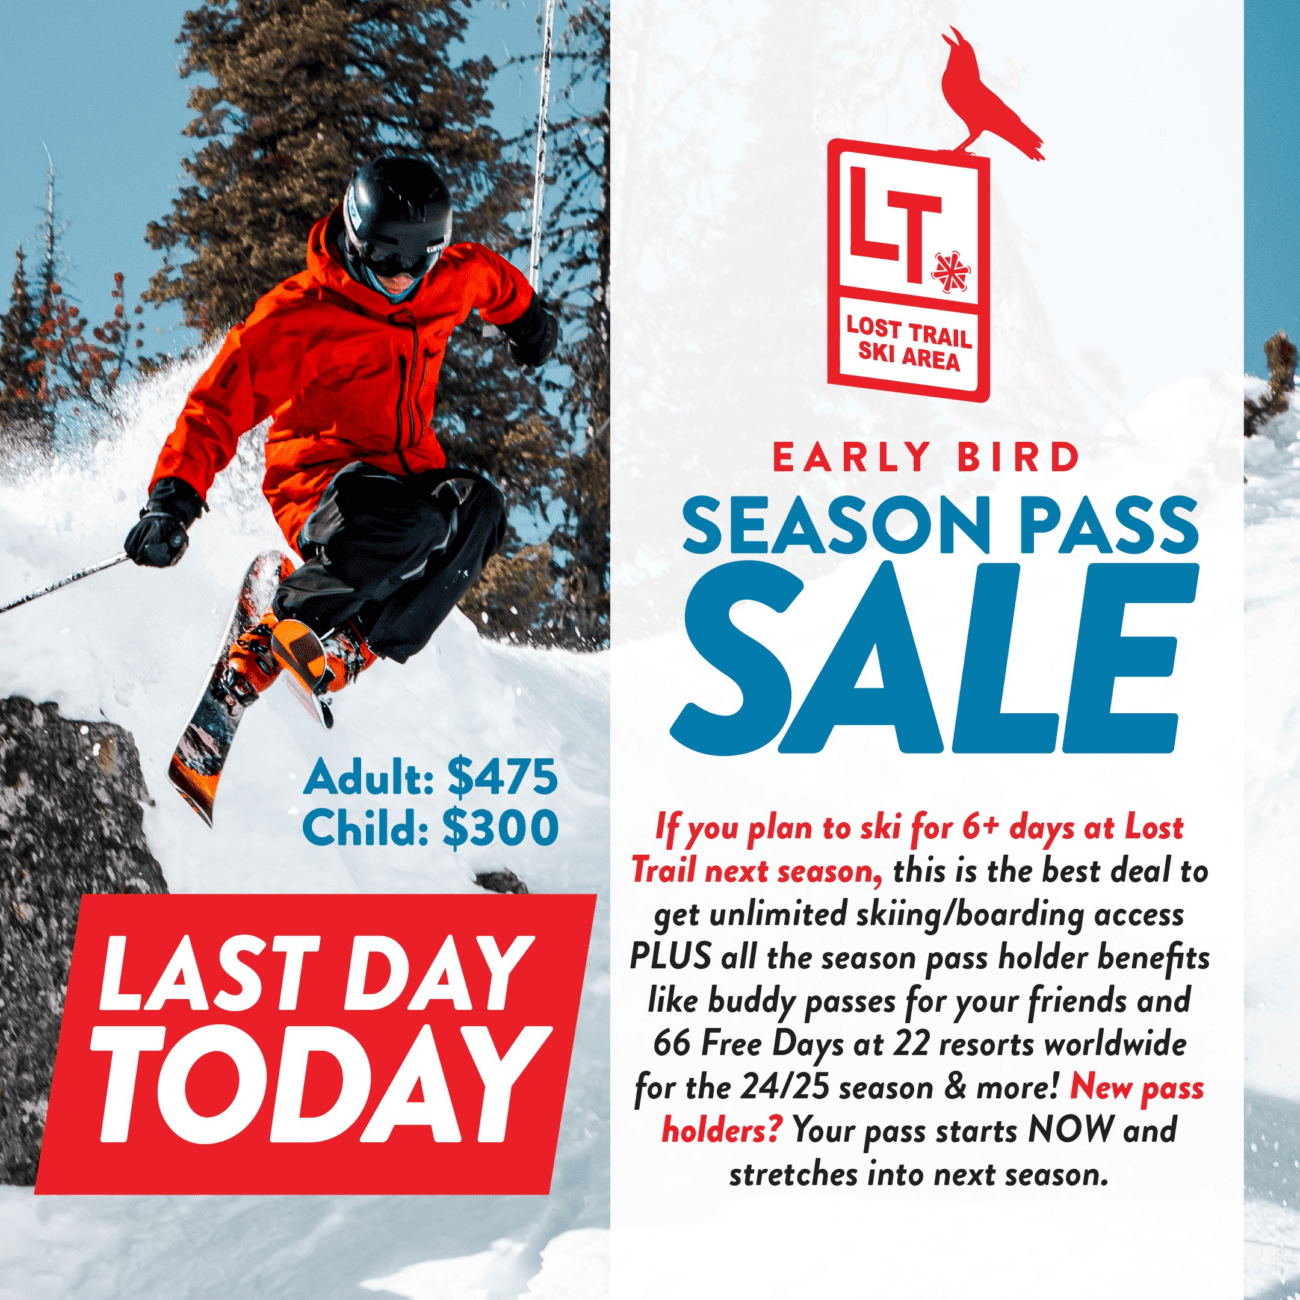 Promotional ski resort flyer advertising an early bird season pass sale with an image of a skier in action, capturing the excitement of early bird deals.